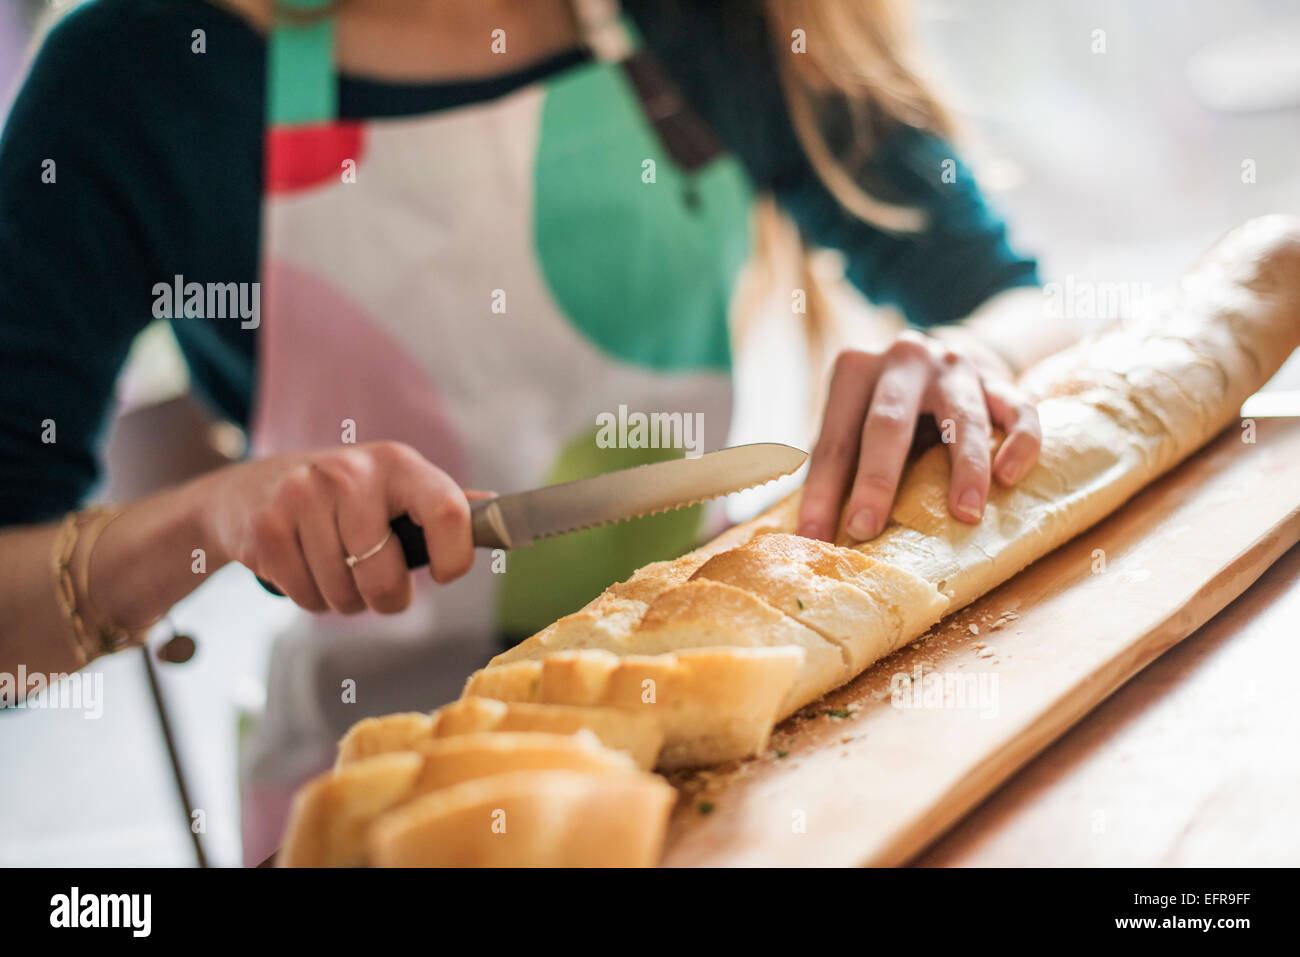 Close up of a woman wearing an apron, sitting at a table, slicing a baguette. Stock Photo